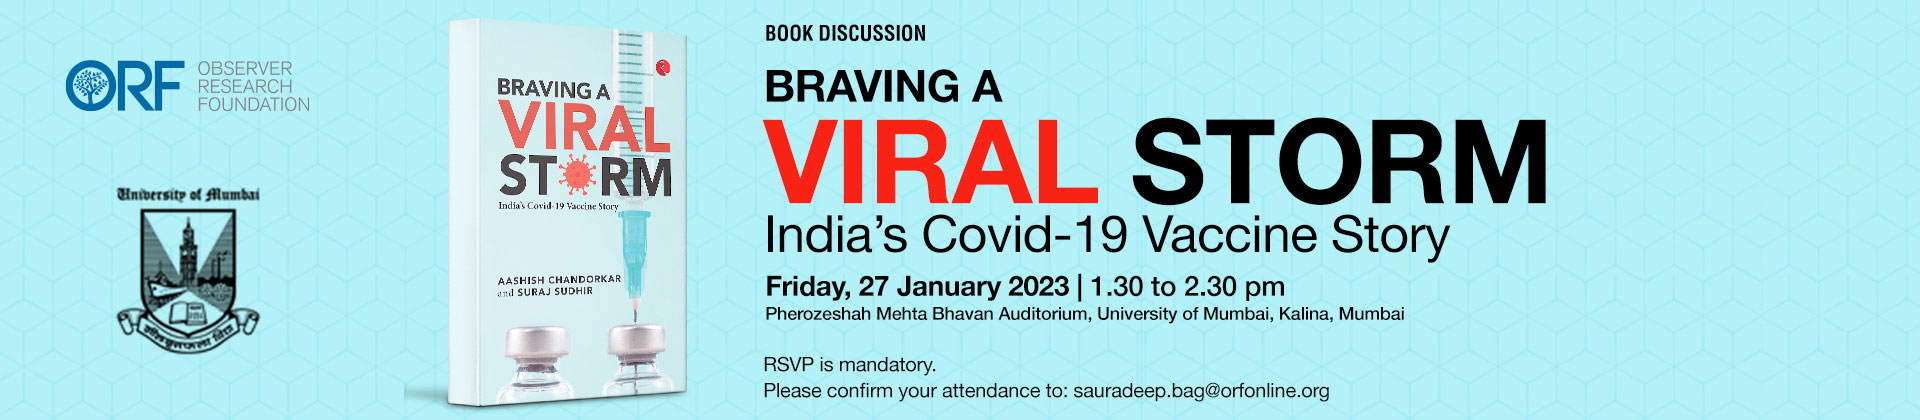 Book Discussion | Braving A Viral Storm: India’s Covid-19 Vaccine Story